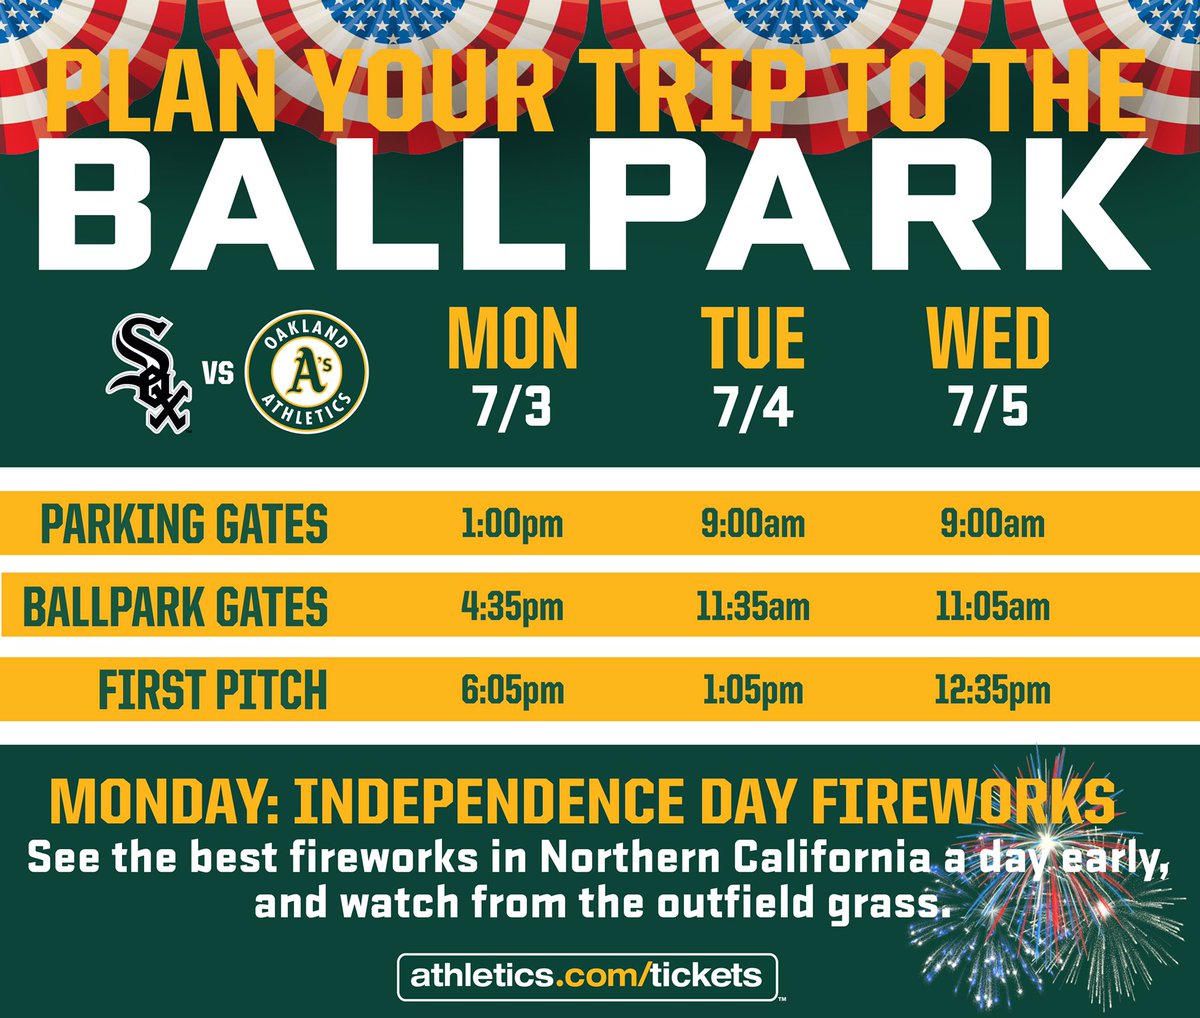 Fireworks a day early! 🎆🎇 #RootedInOakland https://t.co/Aih4FhGo2n